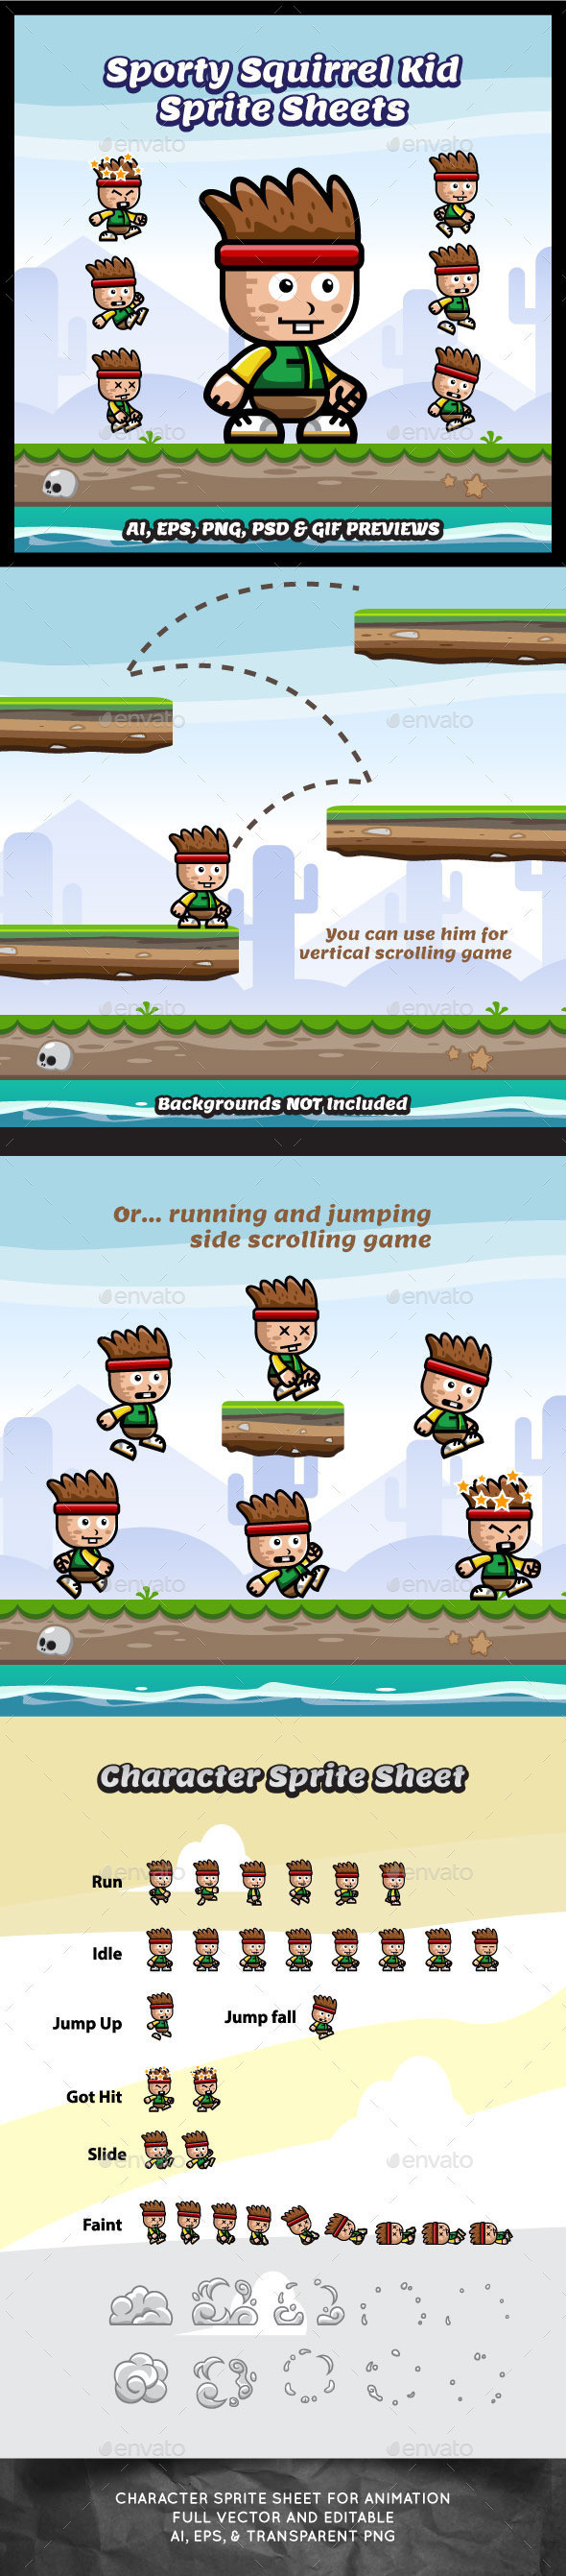 Squirrel sporty kid game character sprite sheet sidescroller game asset flying flappy animation gui mobile games gameart game art 590